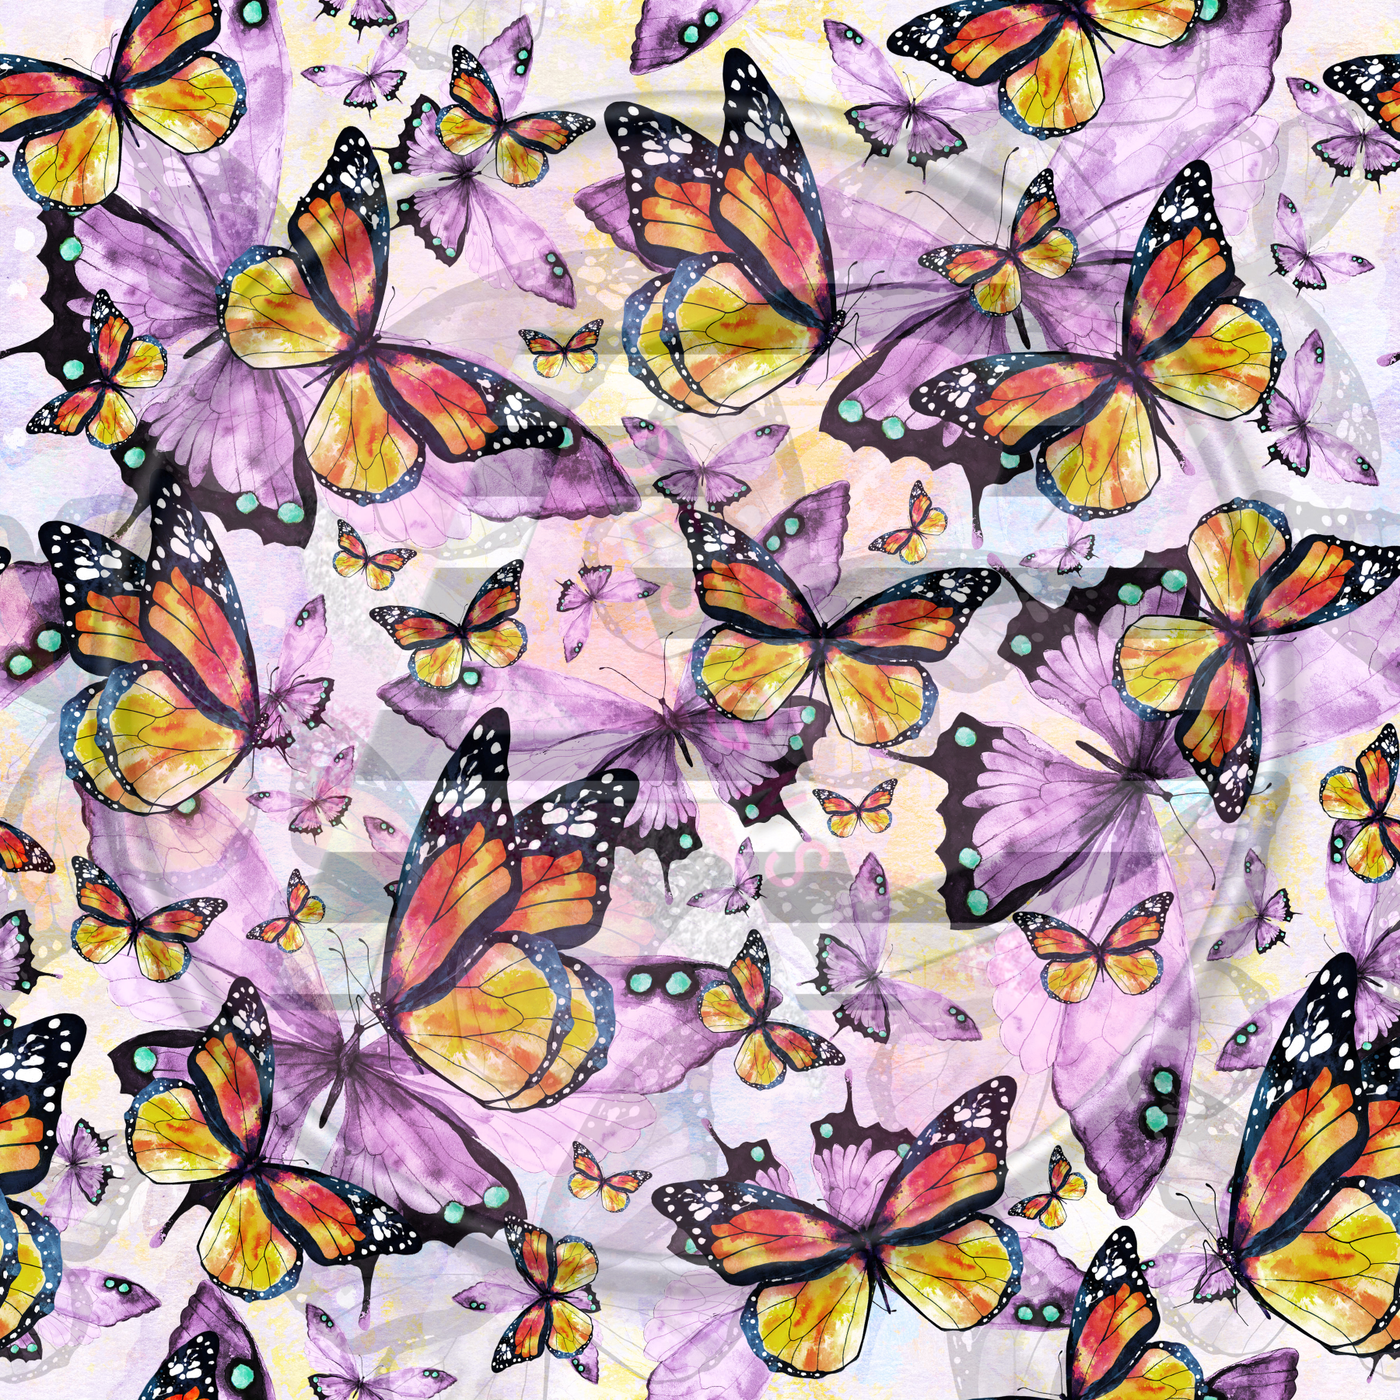 Adhesive Patterned Vinyl - Butterfly 14